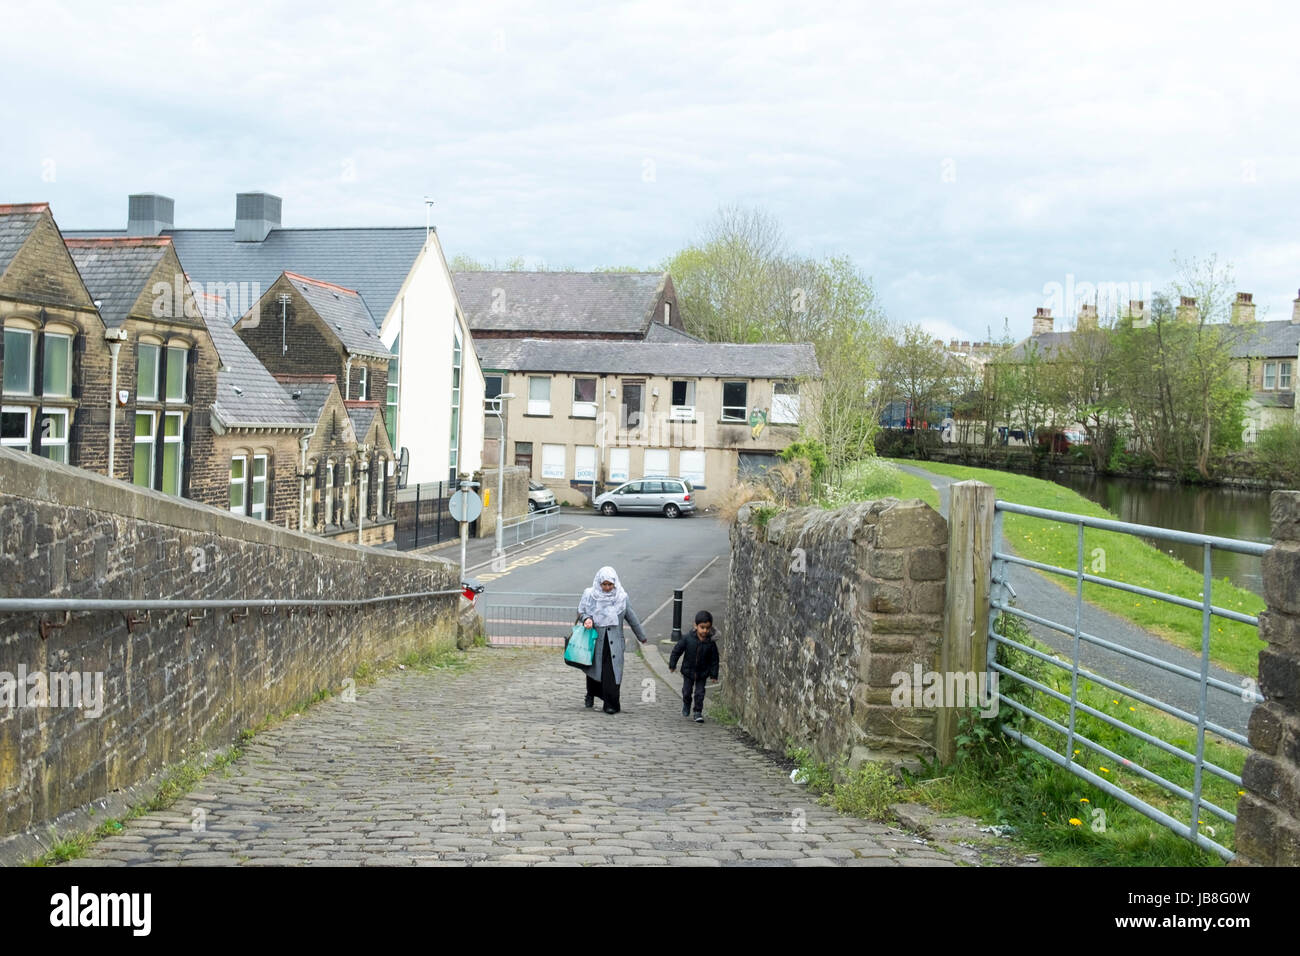 General view of Nelson , a town in Lancashire in the notth of England Stock Photo